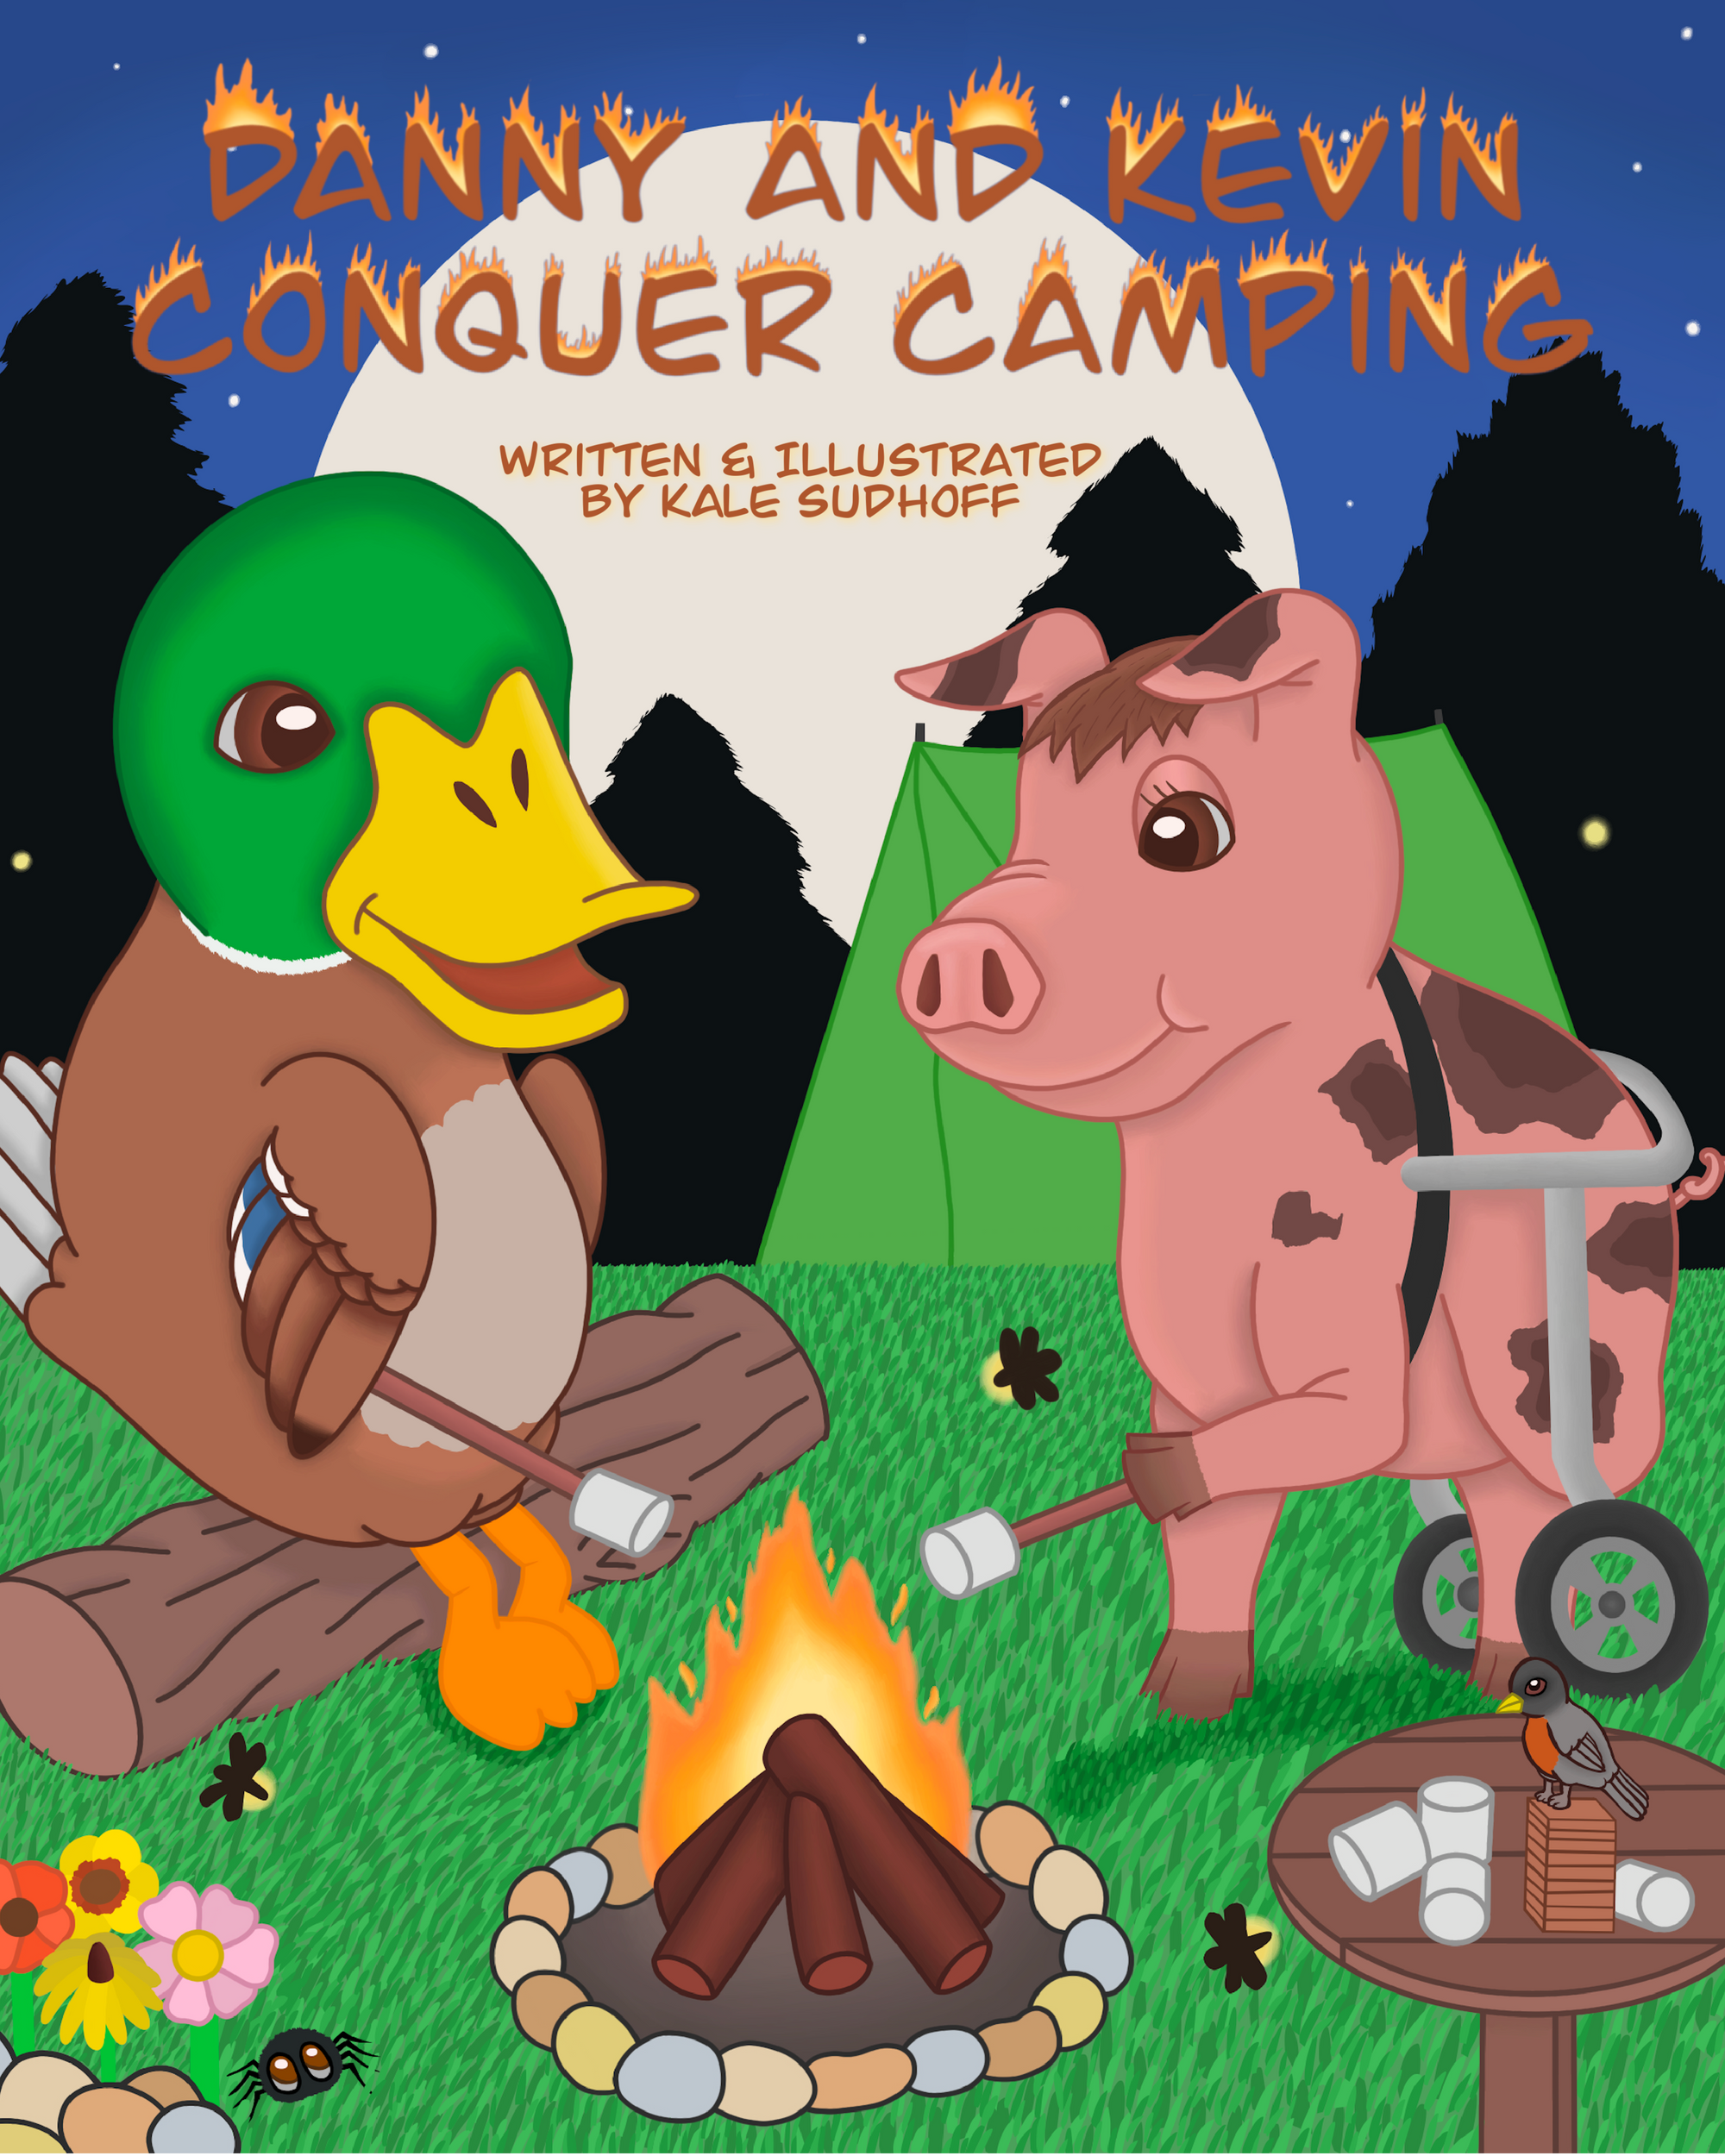 Danny and Kevin Conquer Camping AUTHOR COPIES